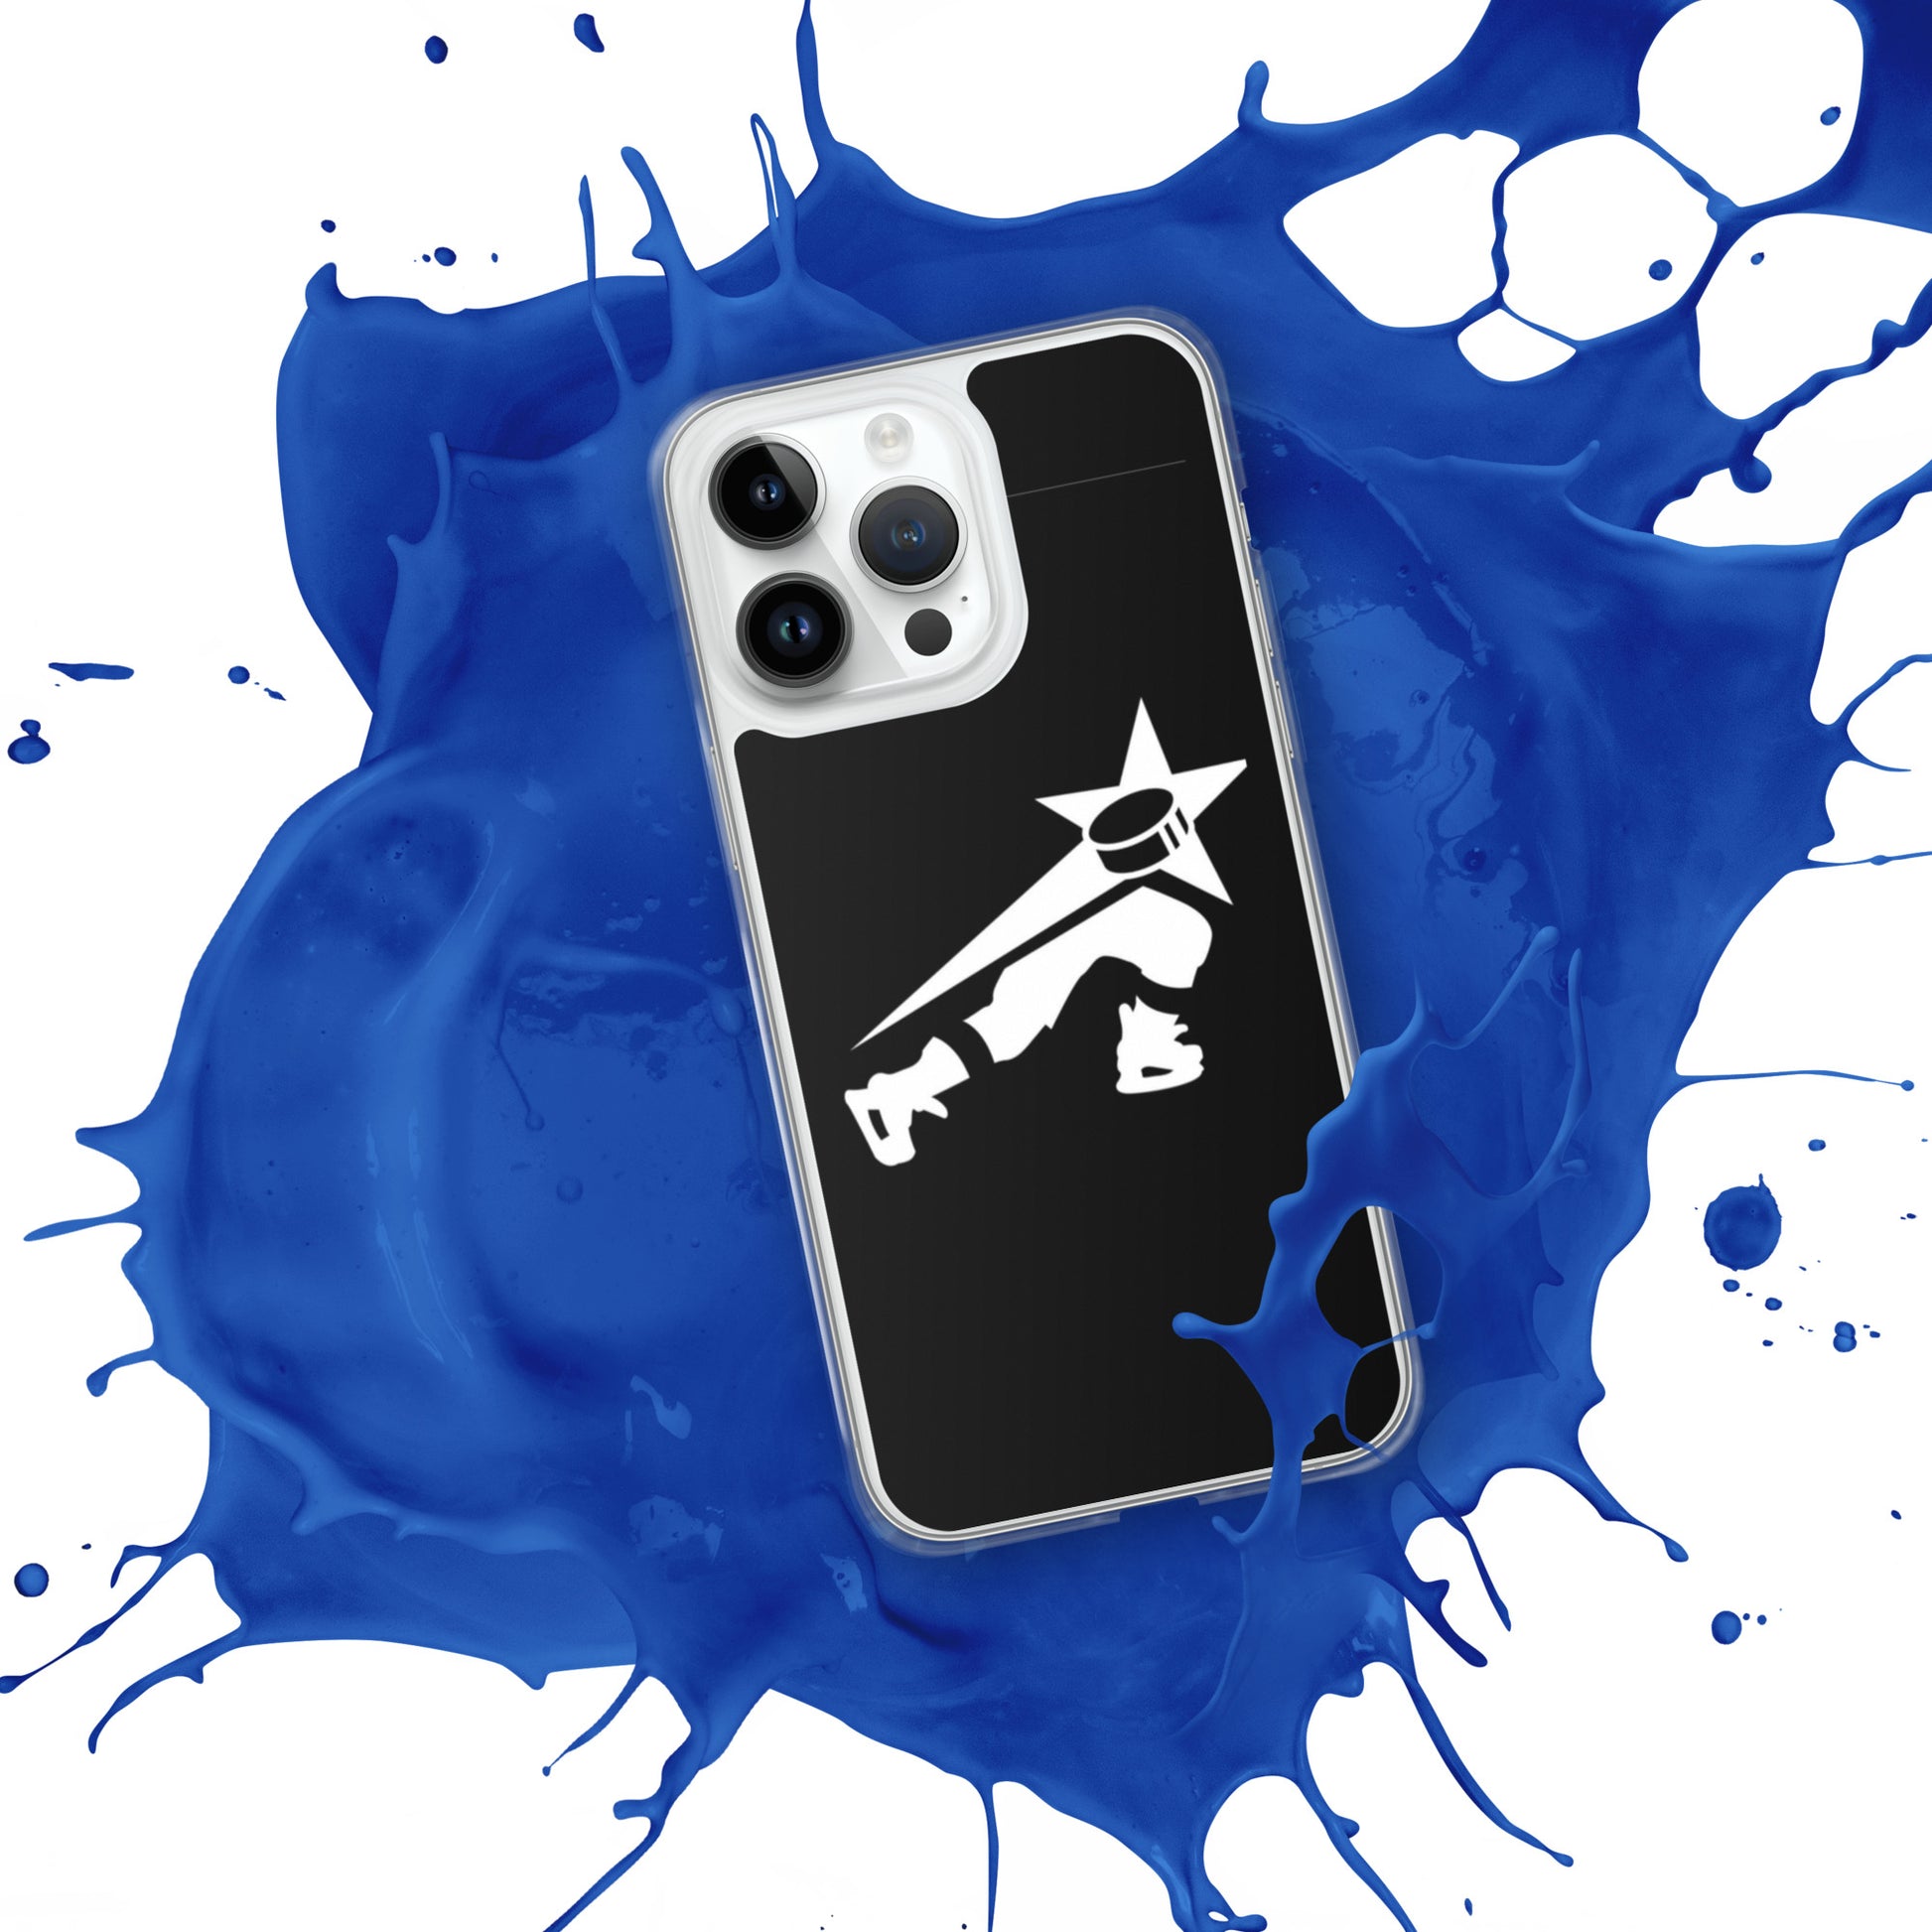 iPhone blue case featuring a stylized white character with a star head, placed atop a spilled white liquid background